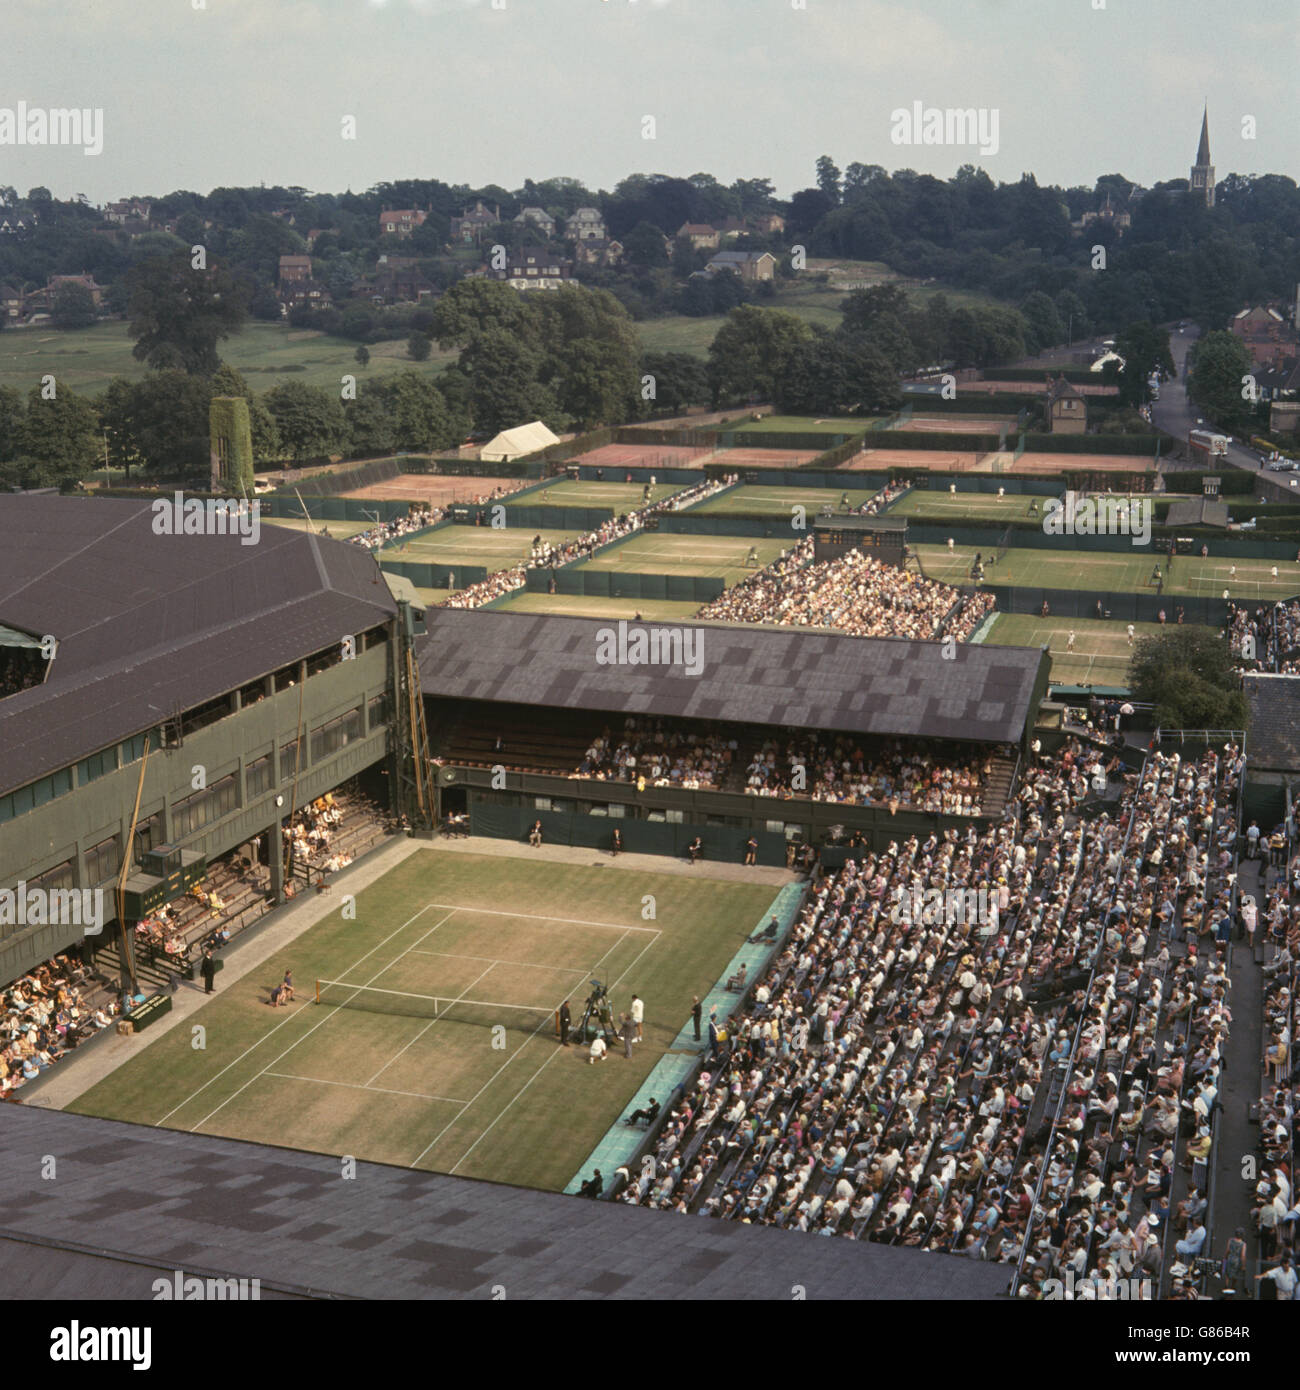 Tennis - Wimbledon Championships - The All England Lawn Tennis and Croquet Club. Aerial view of No. 1 Court at Wimbledon. Stock Photo